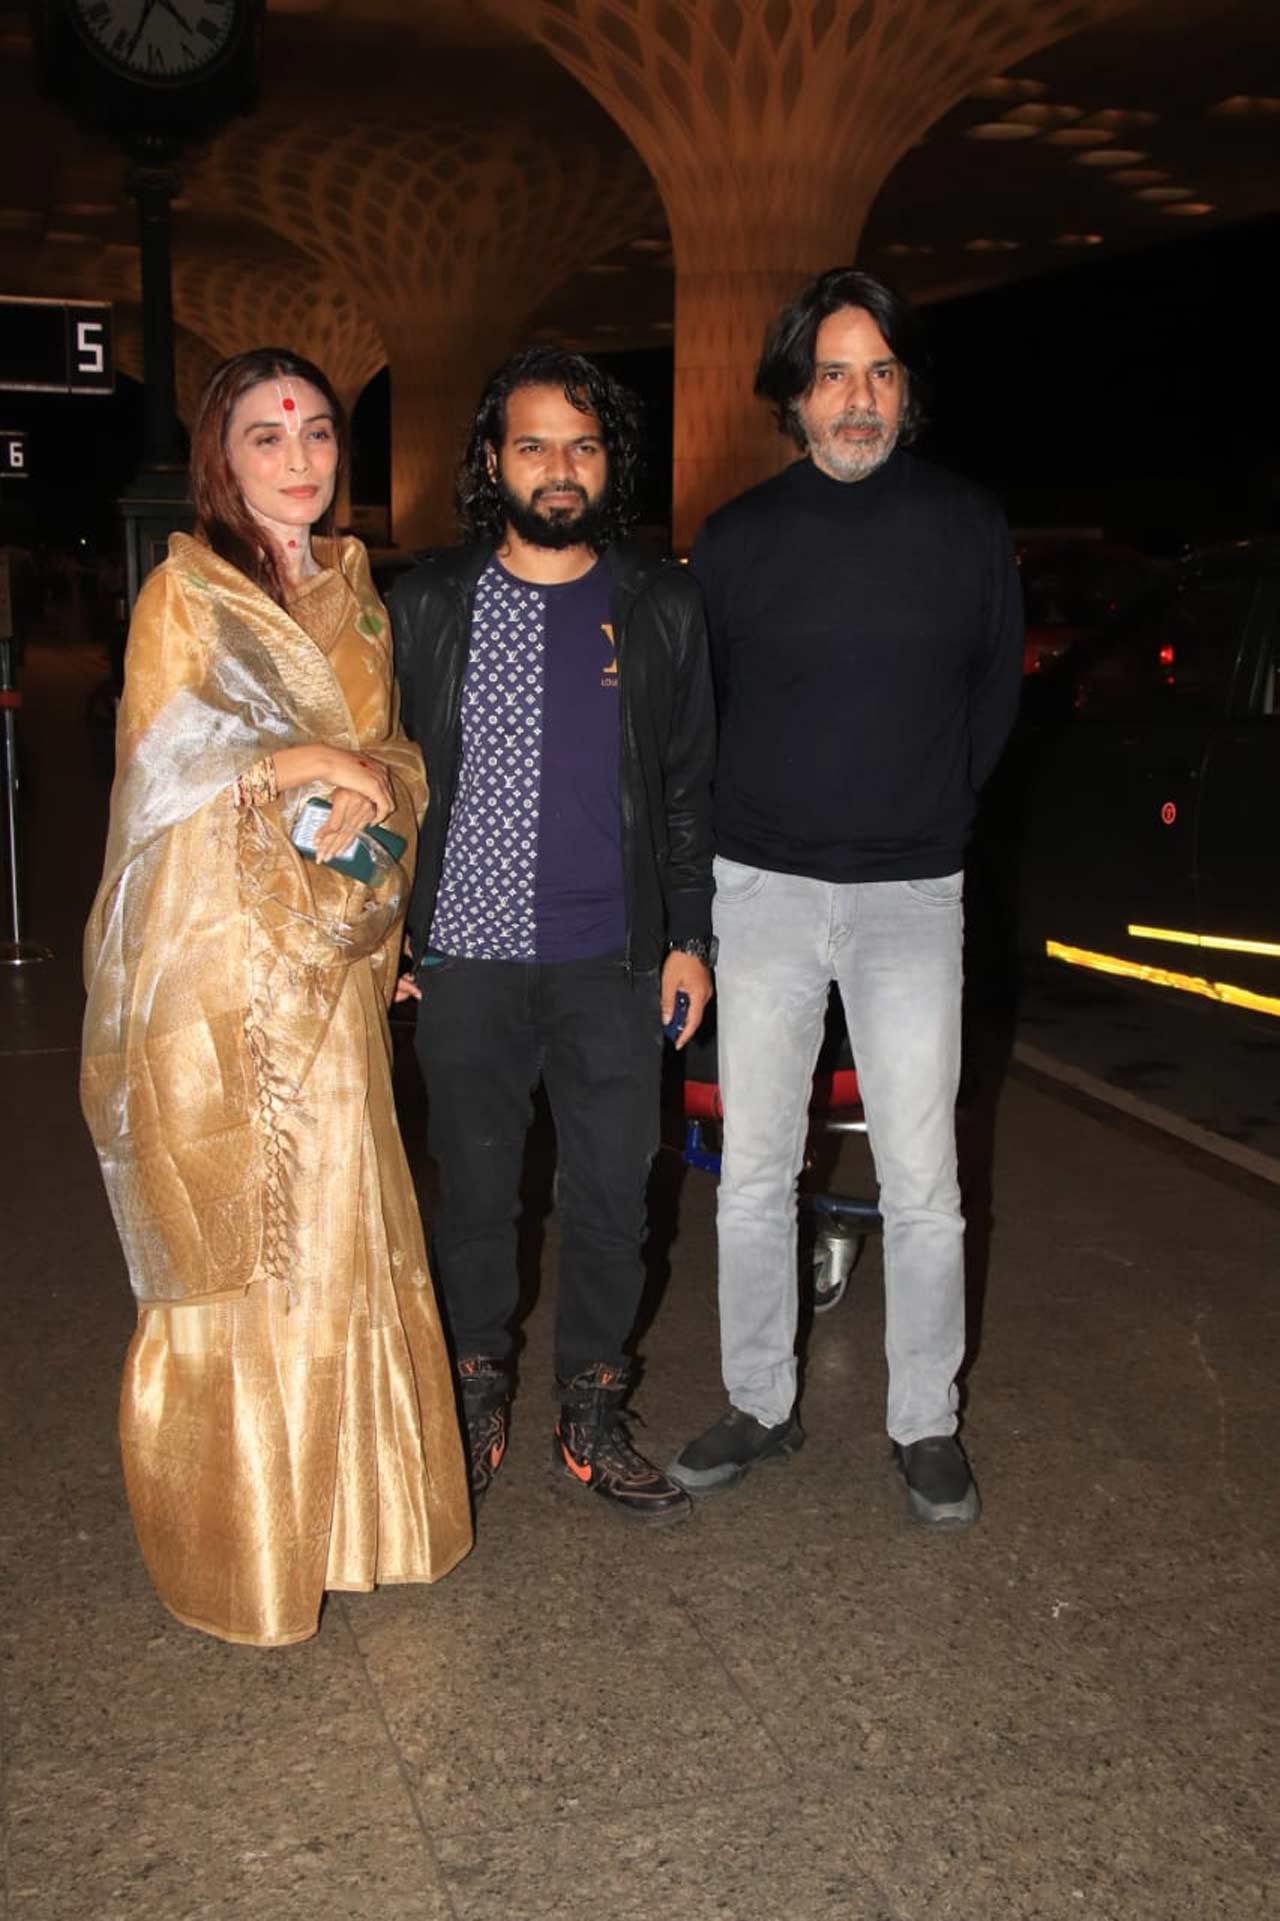 Rahul Roy was snapped with sister Priyanka and her husband Romeel Sen at the Mumbai airport. The actor was seen in casual wear, whereas his sister draped a sari for the outing.